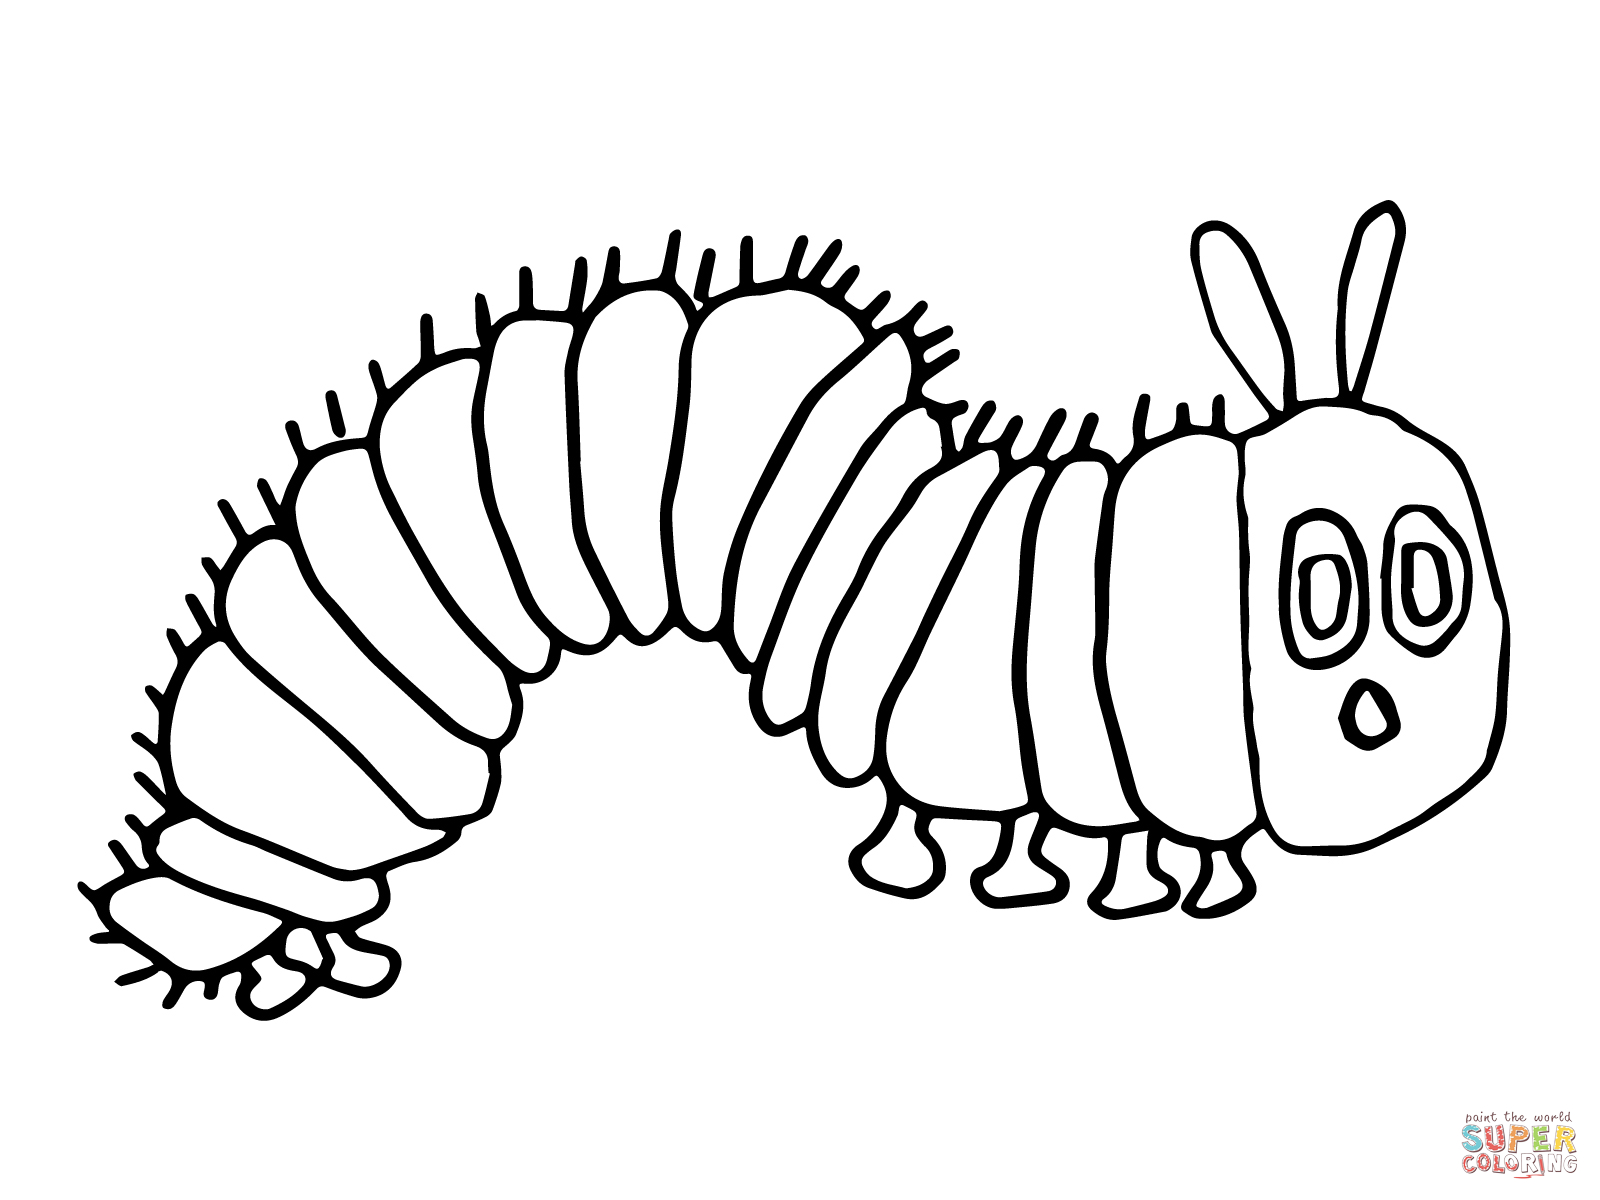 free-caterpillar-outline-download-free-caterpillar-outline-png-images